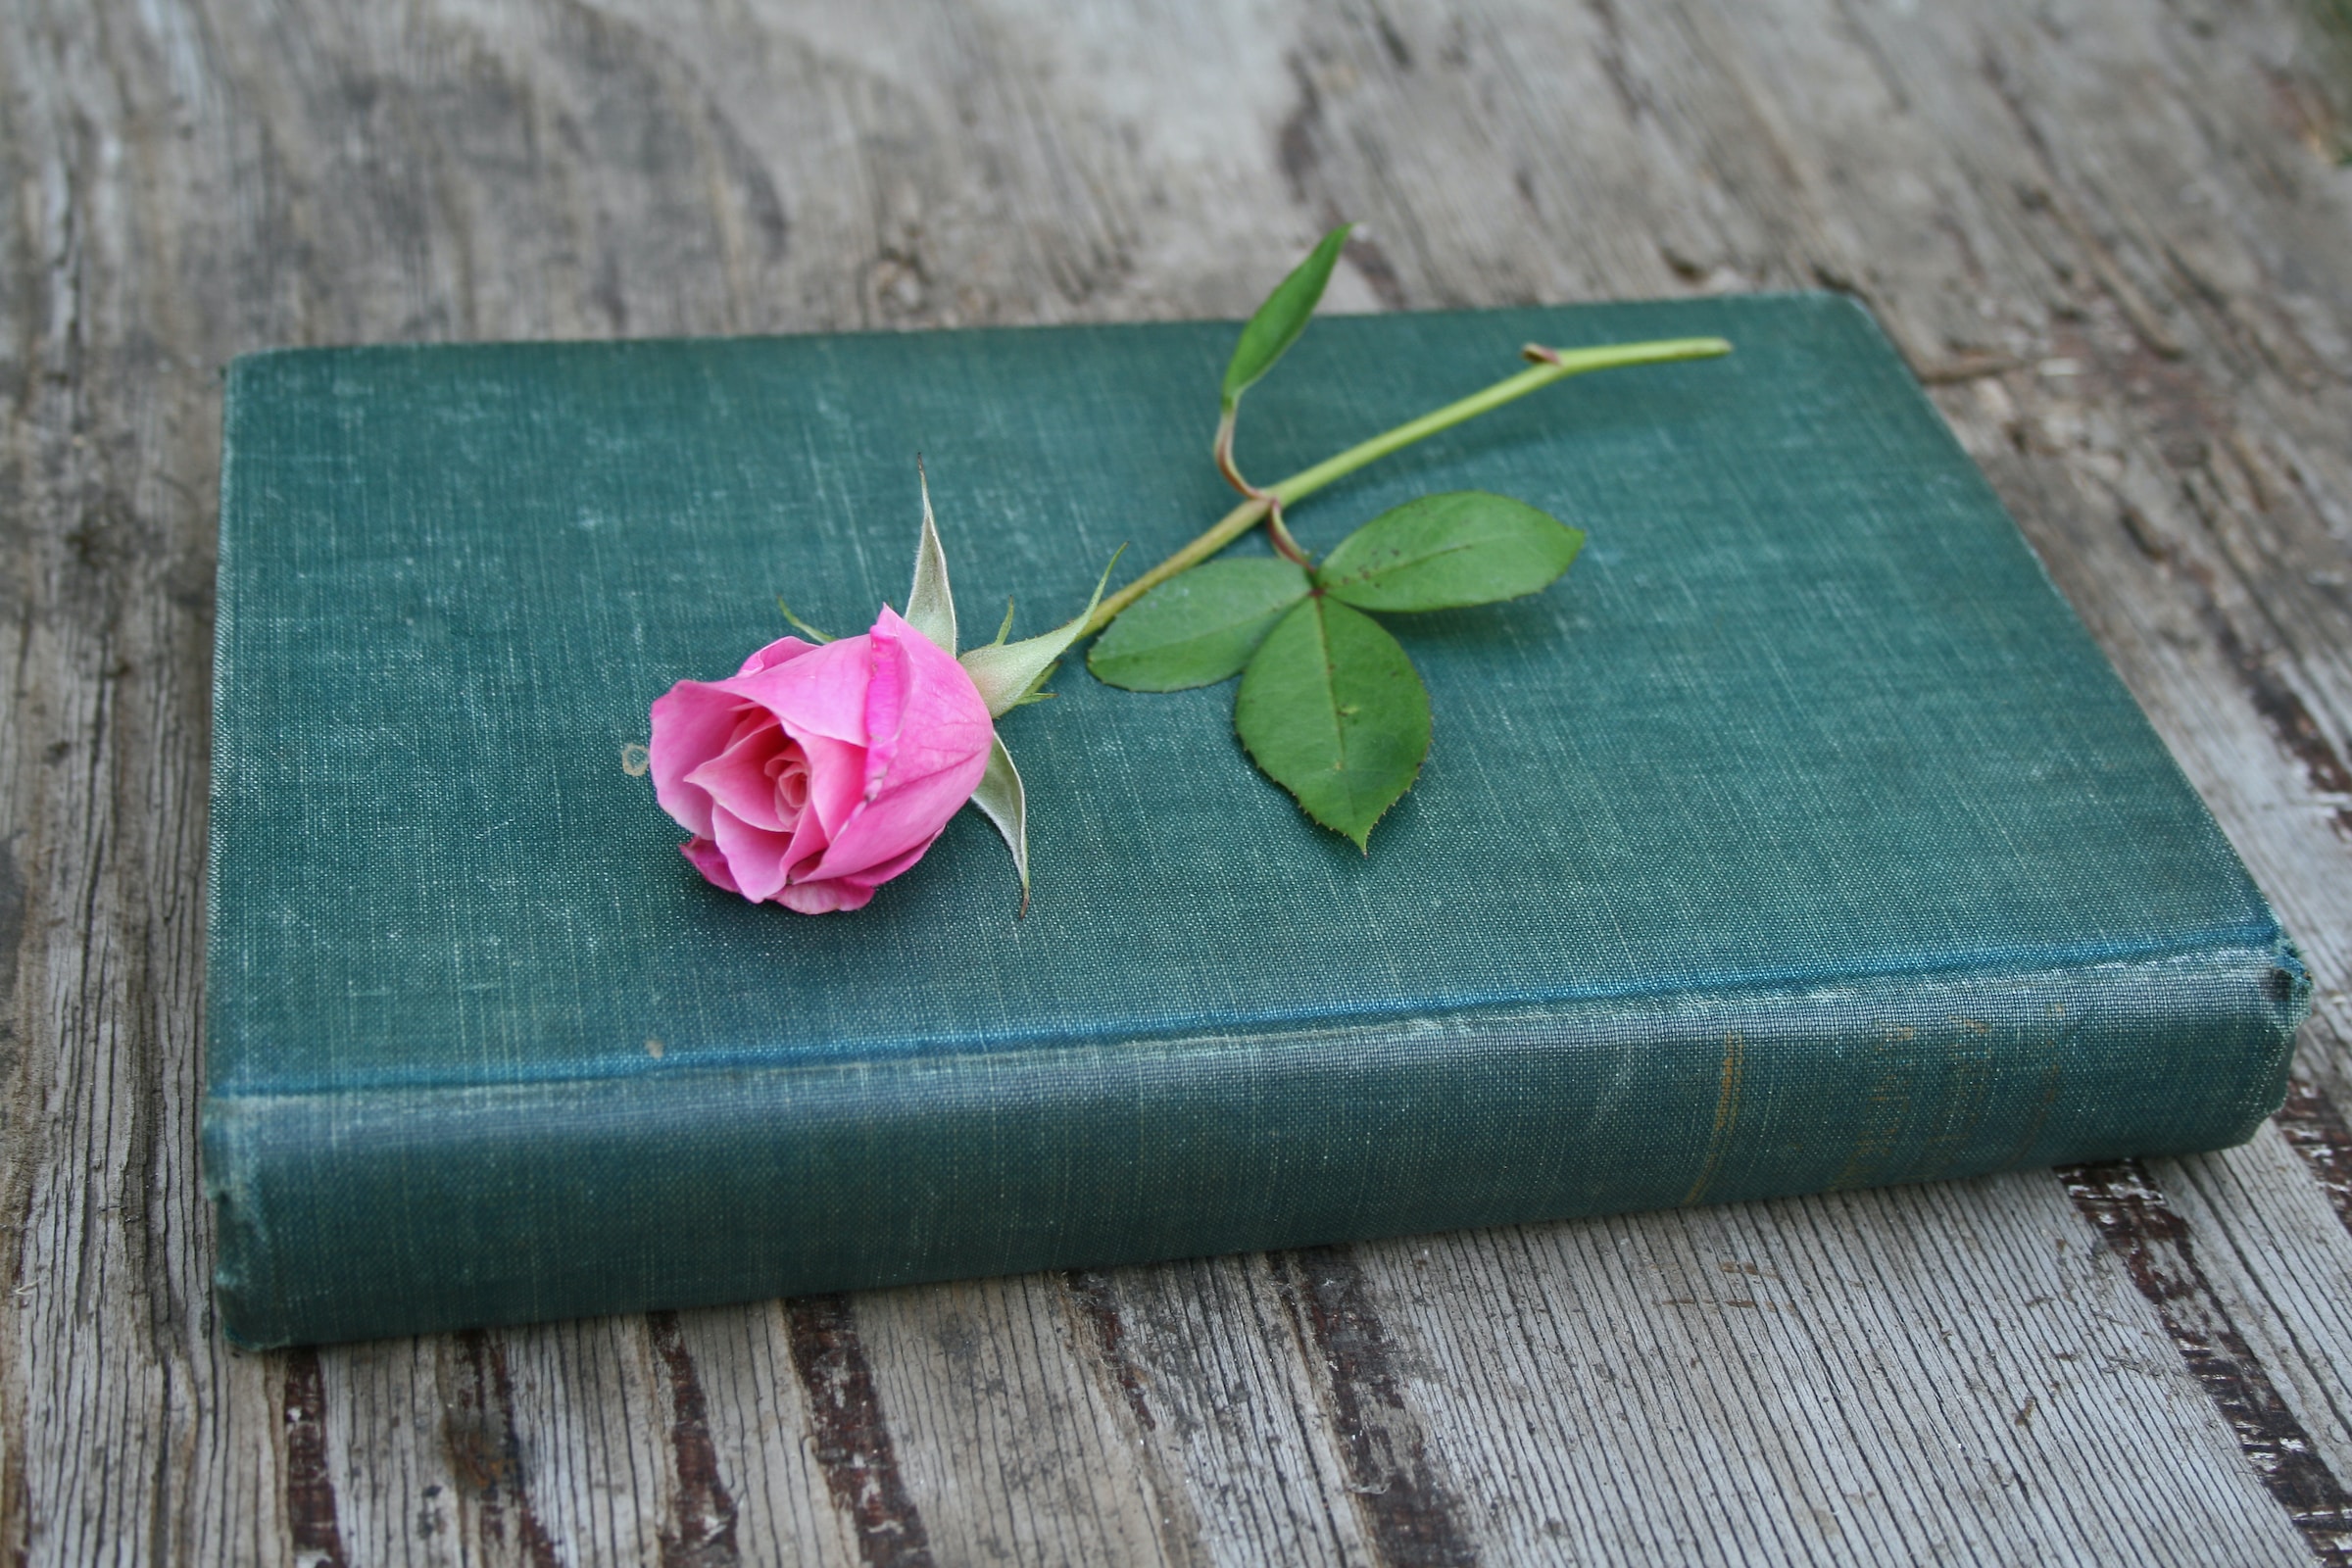 A pink rose lying on a dark green book.